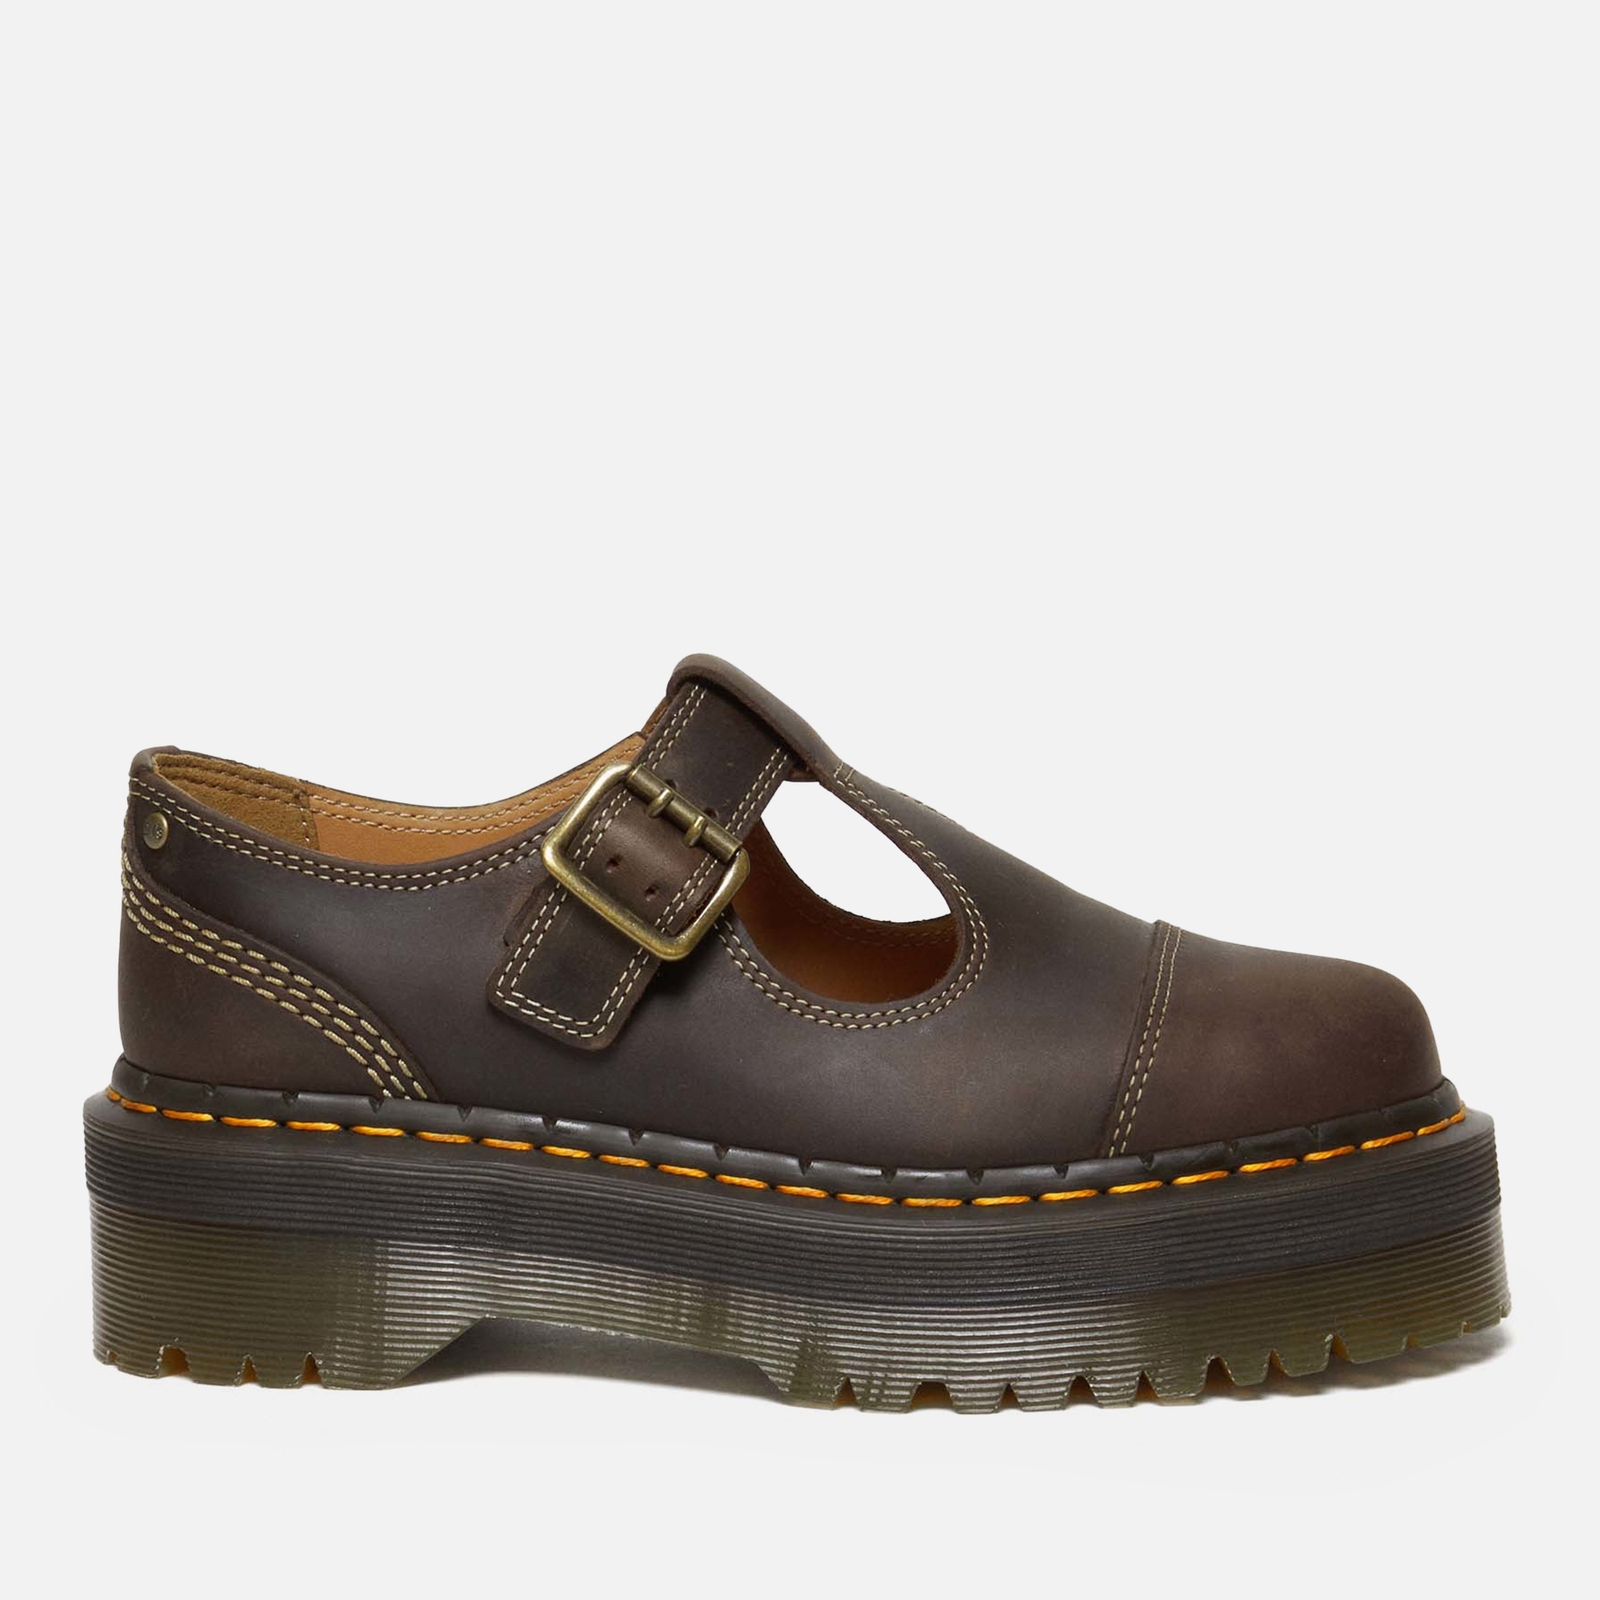 Dr. Martens Bethan Leather Quad Mary-Jane Shoes - UK 8